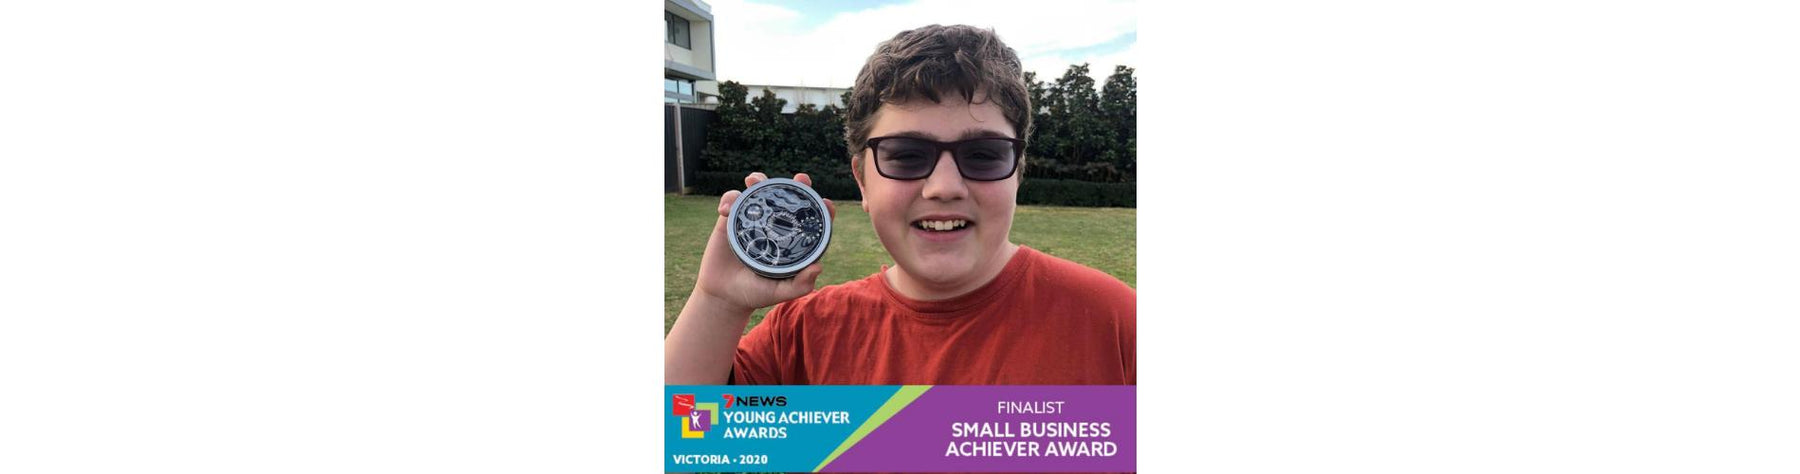 Autistic entrepreneur, 14, youngest finalist in Small Business Awards